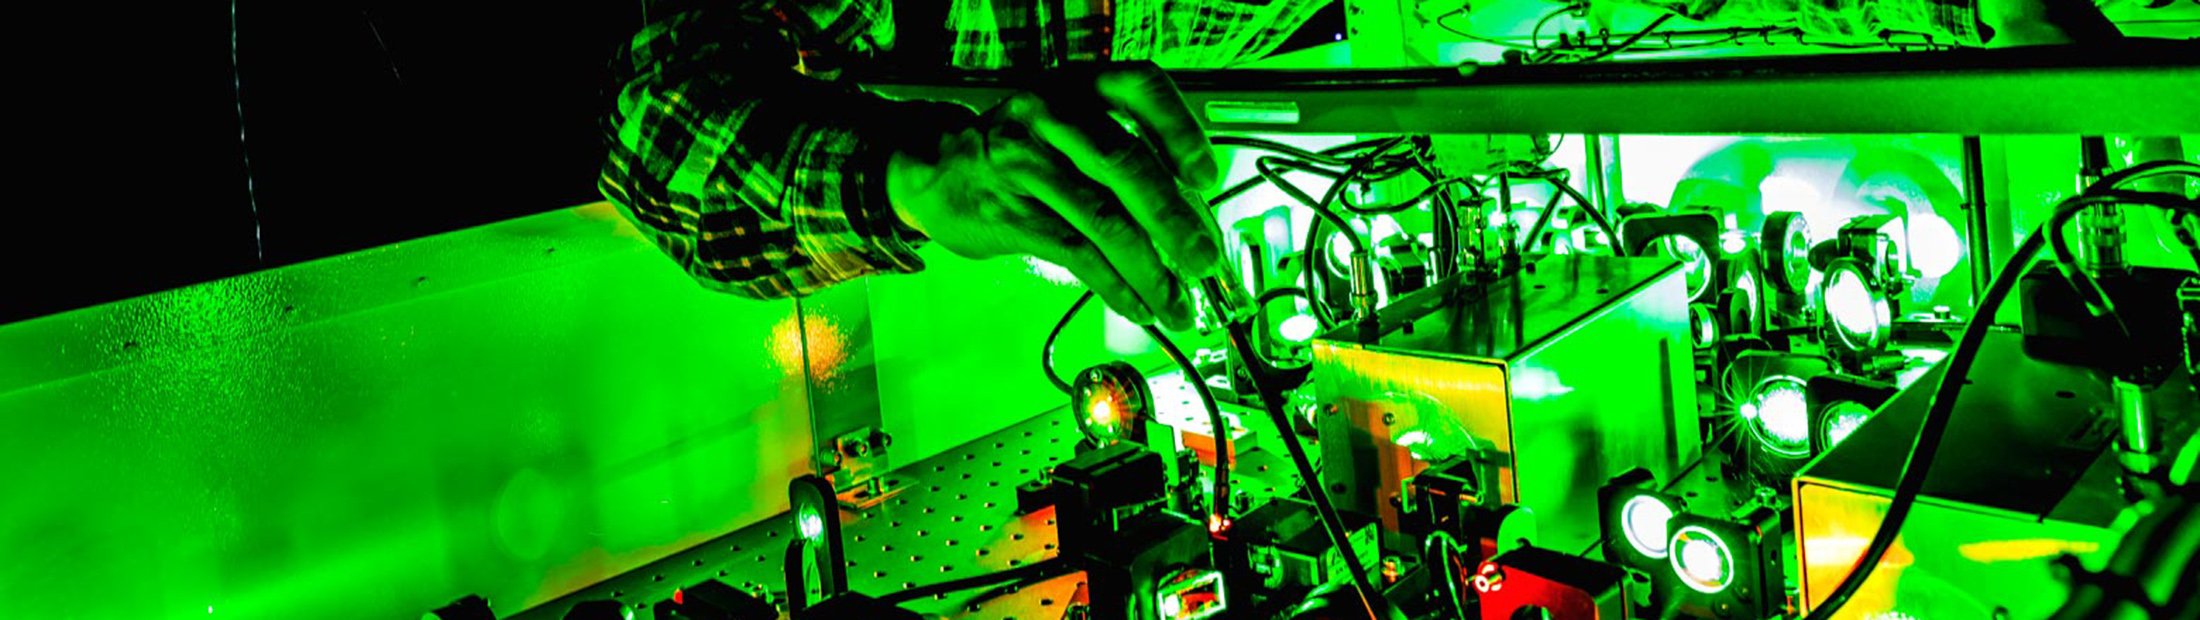 A man in safety goggles adjusts wiring in a dark room with green lasers.